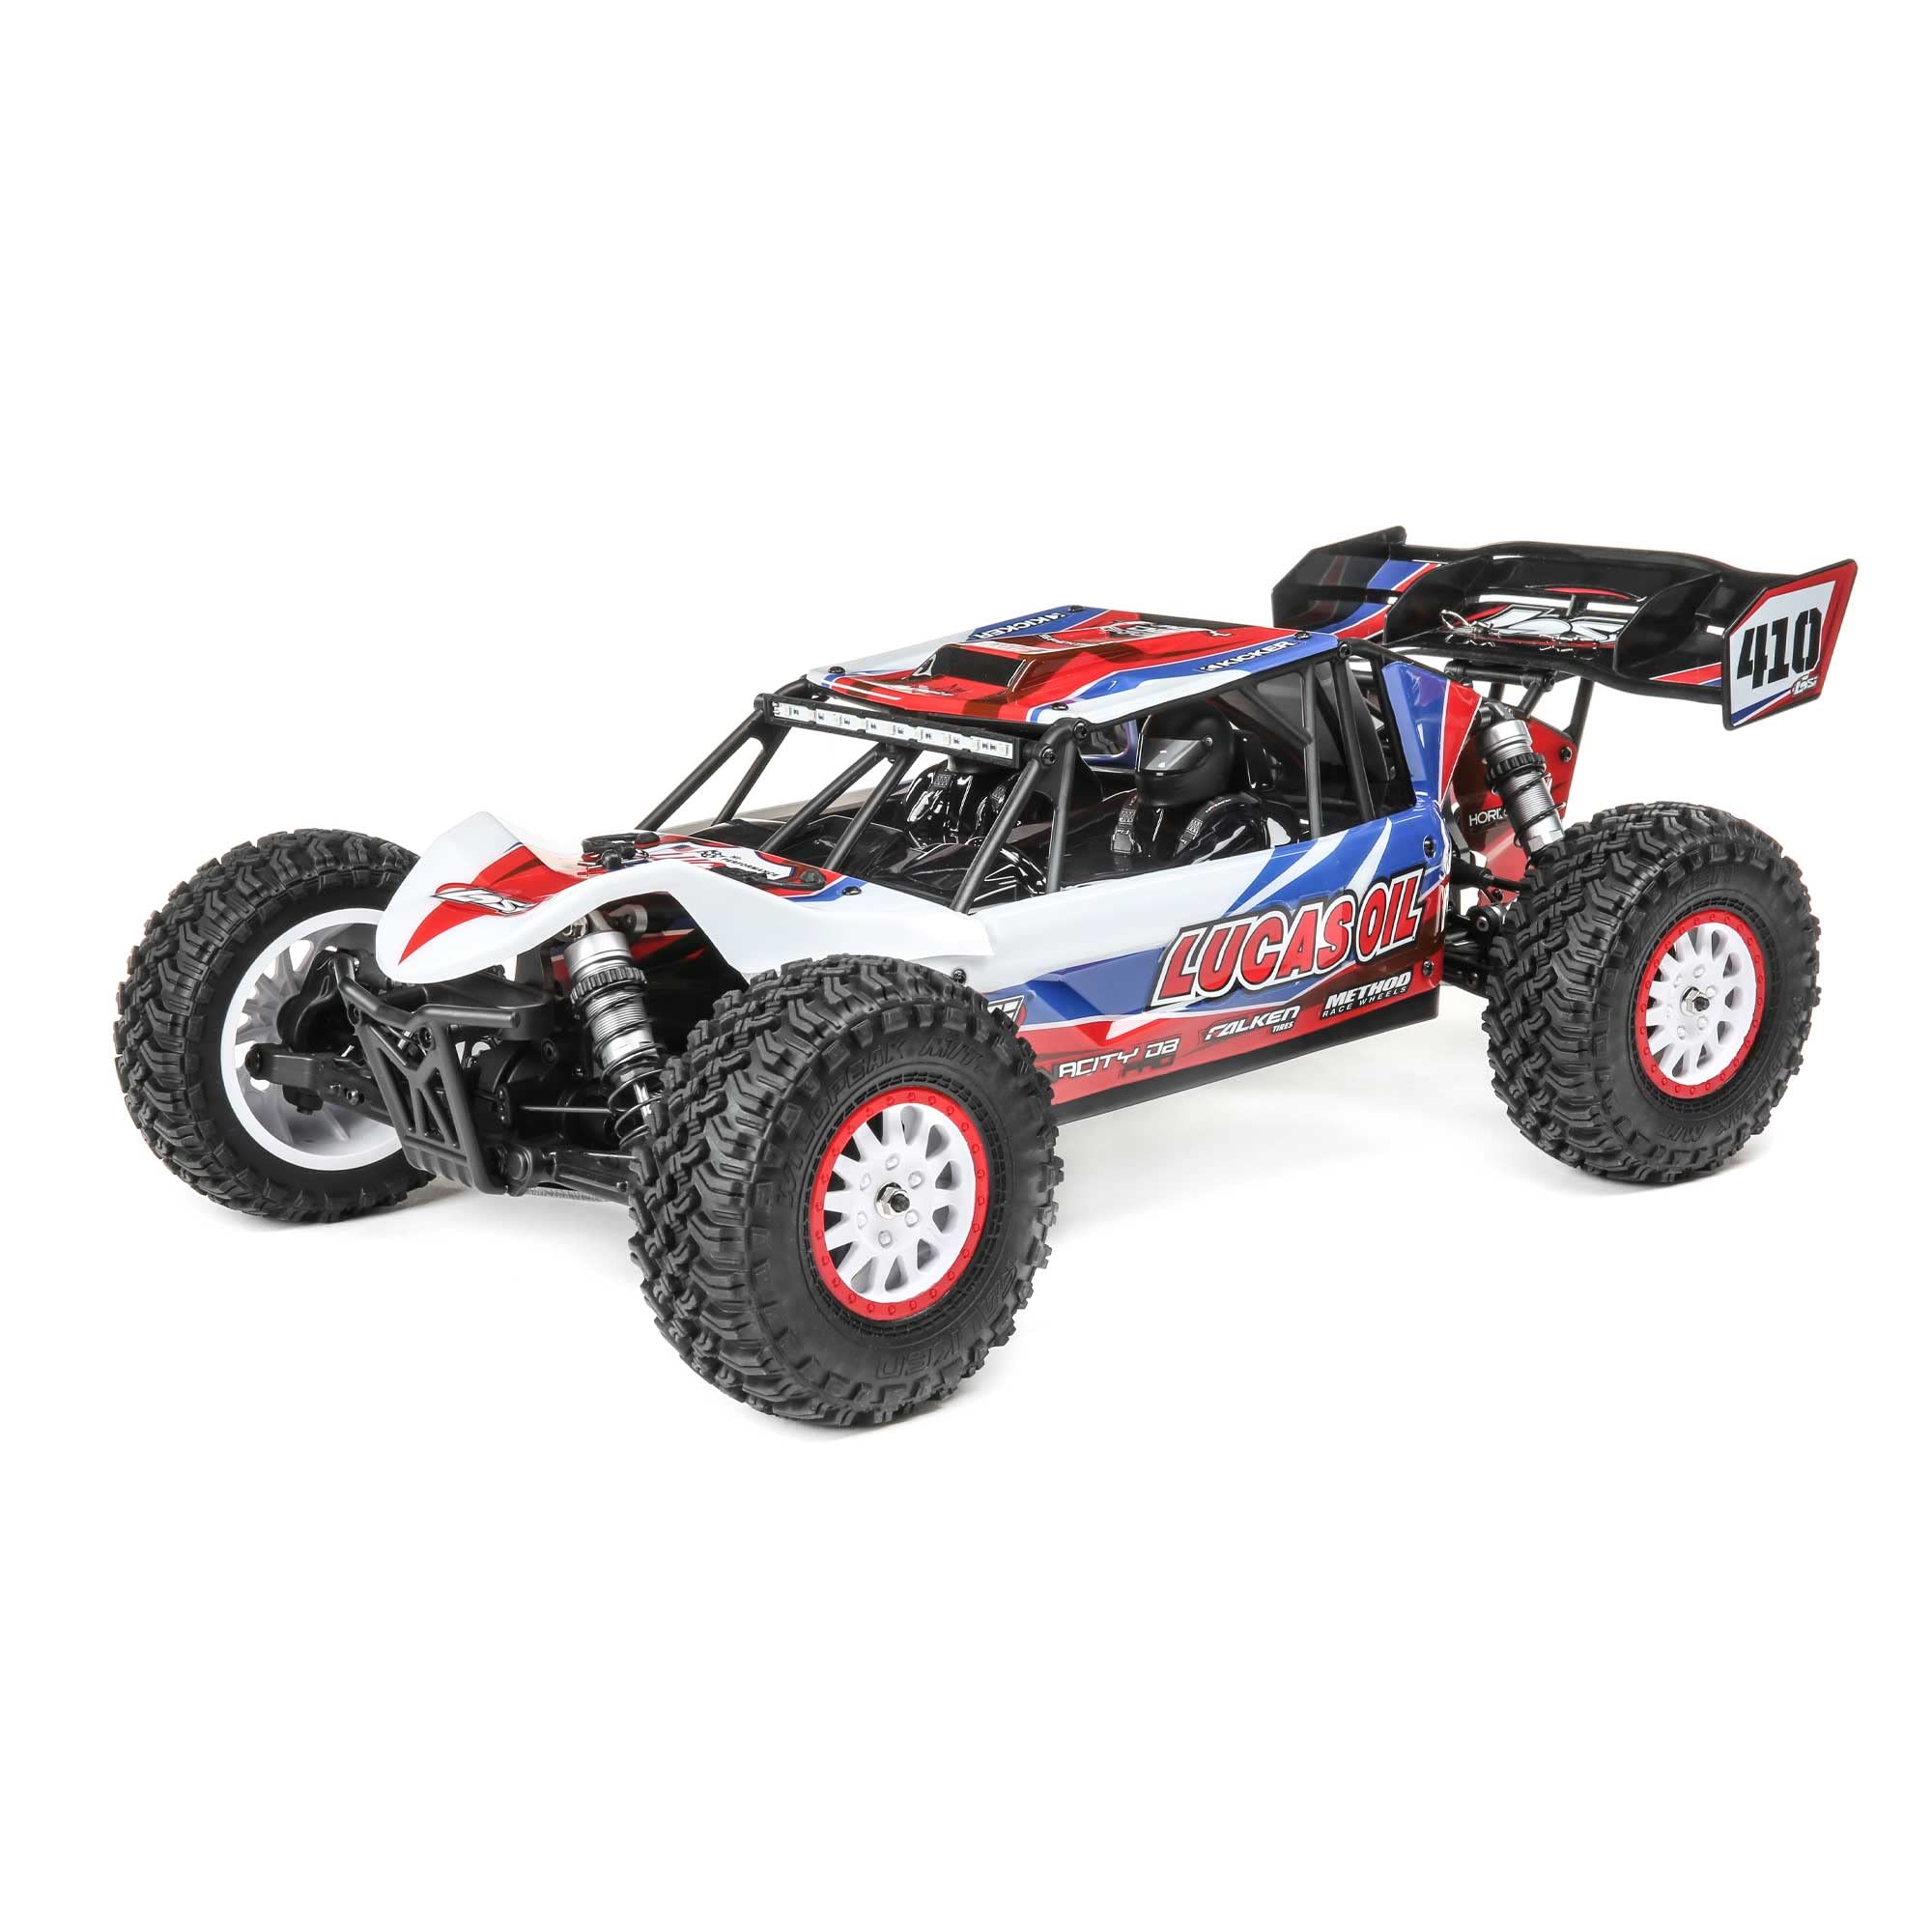 Losi 110 Tenacity DB Pro 4 Wheel Drive Desert Buggy Brushless RTR Battery and charger Not Included with Smart Lucas Oil LOS03027